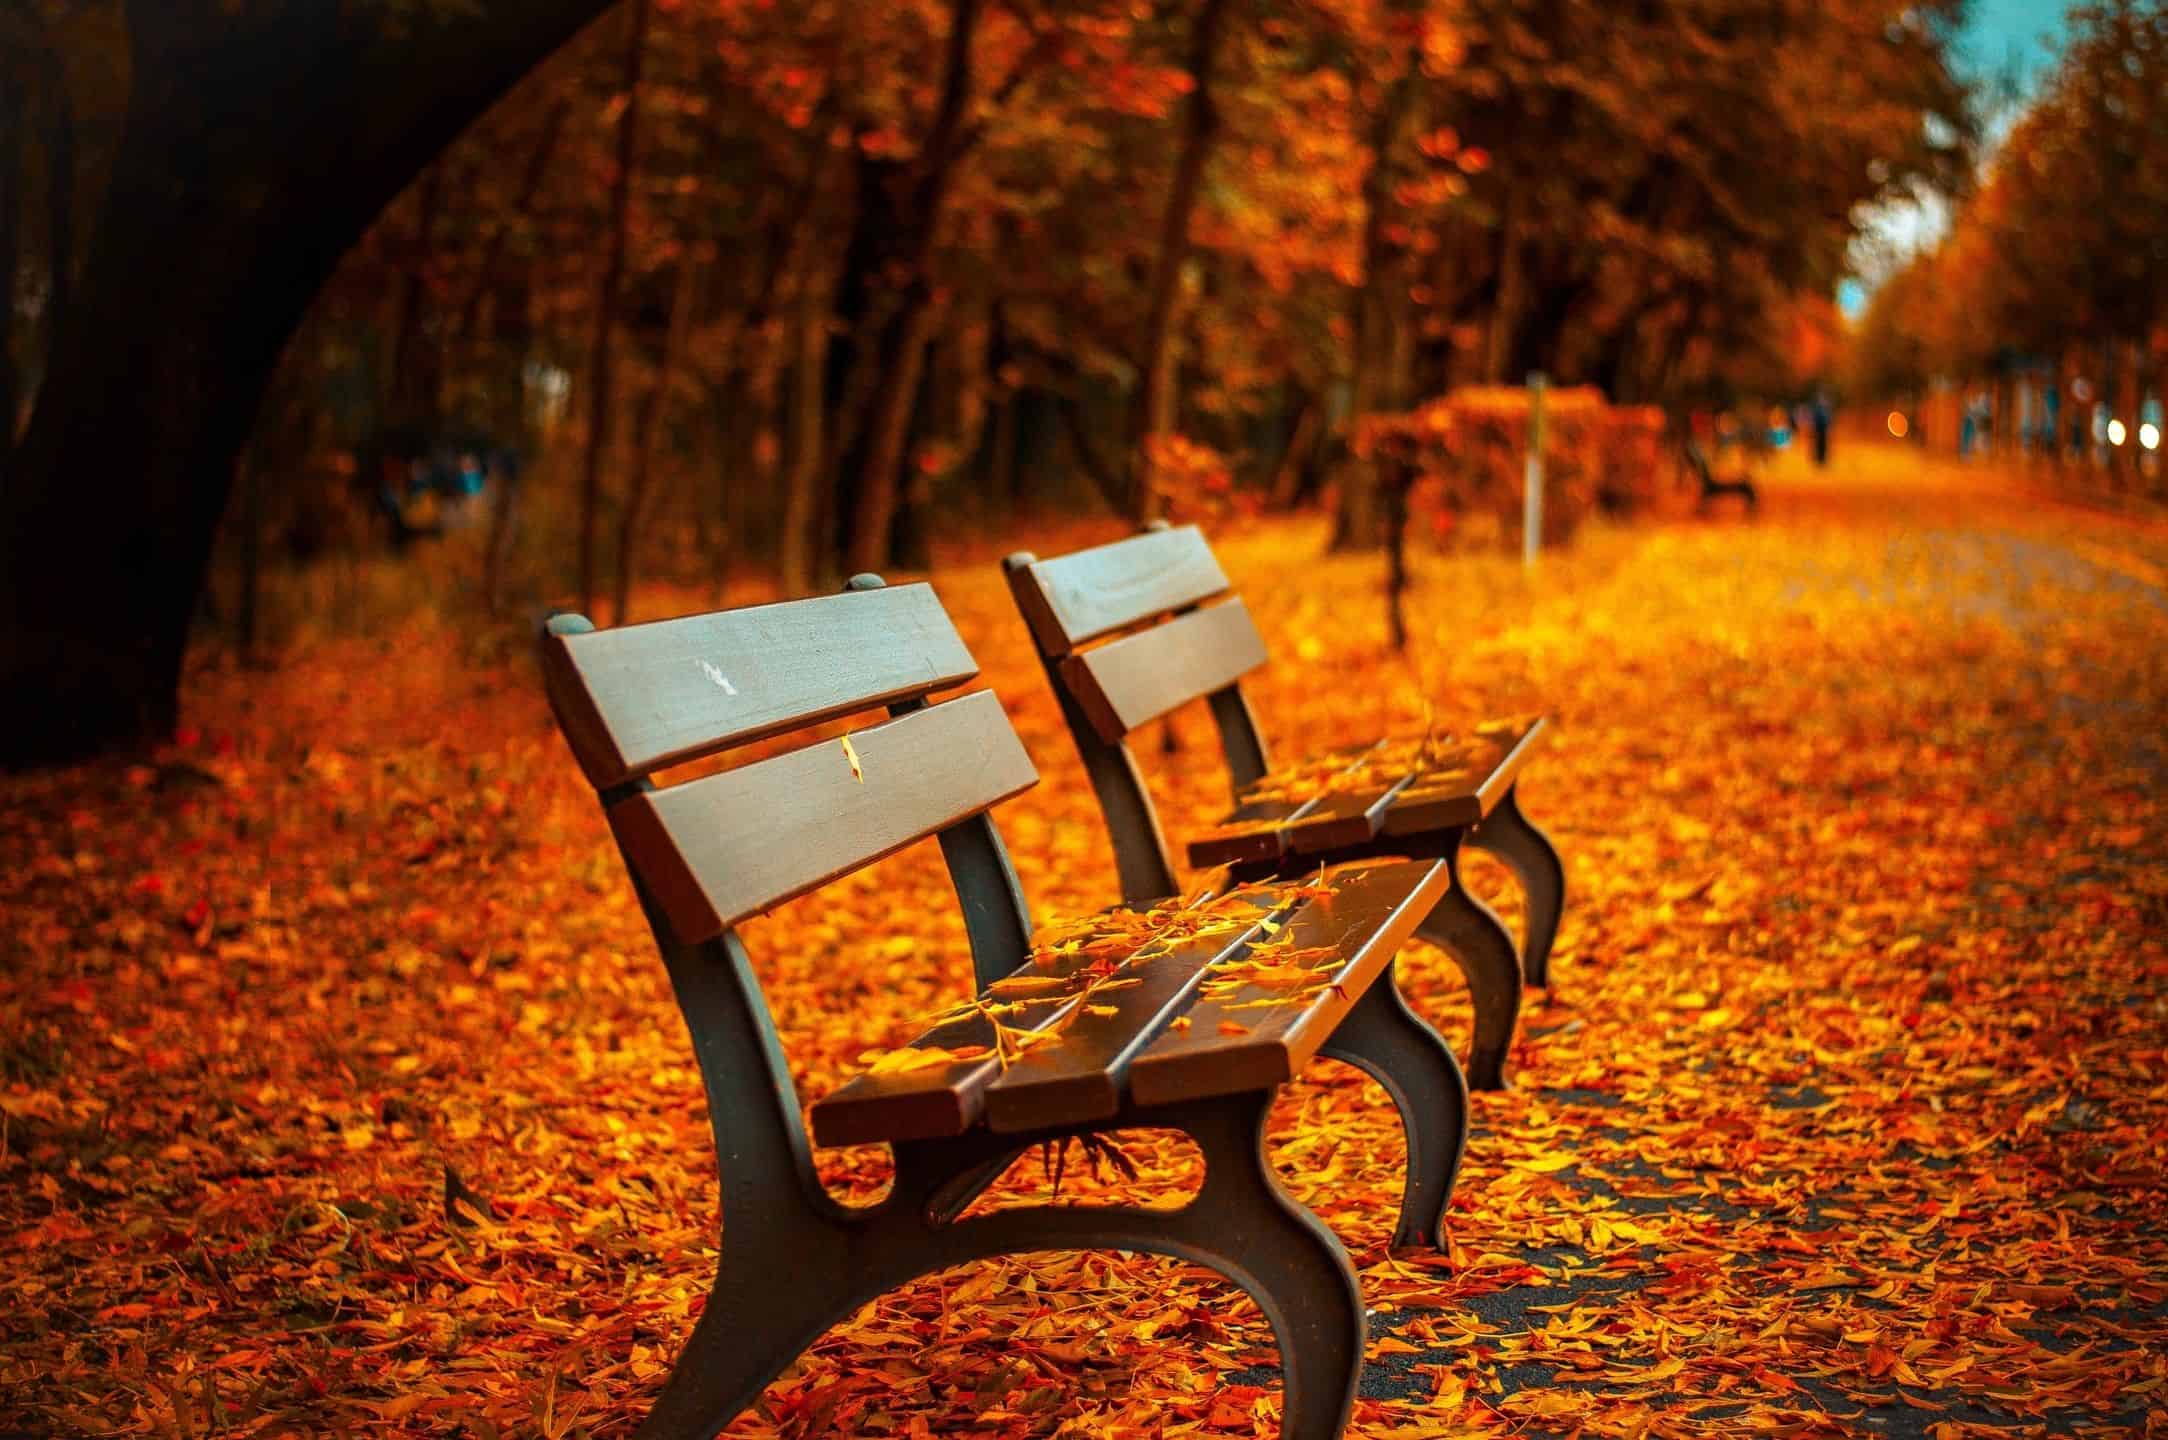 Park bench in the fall